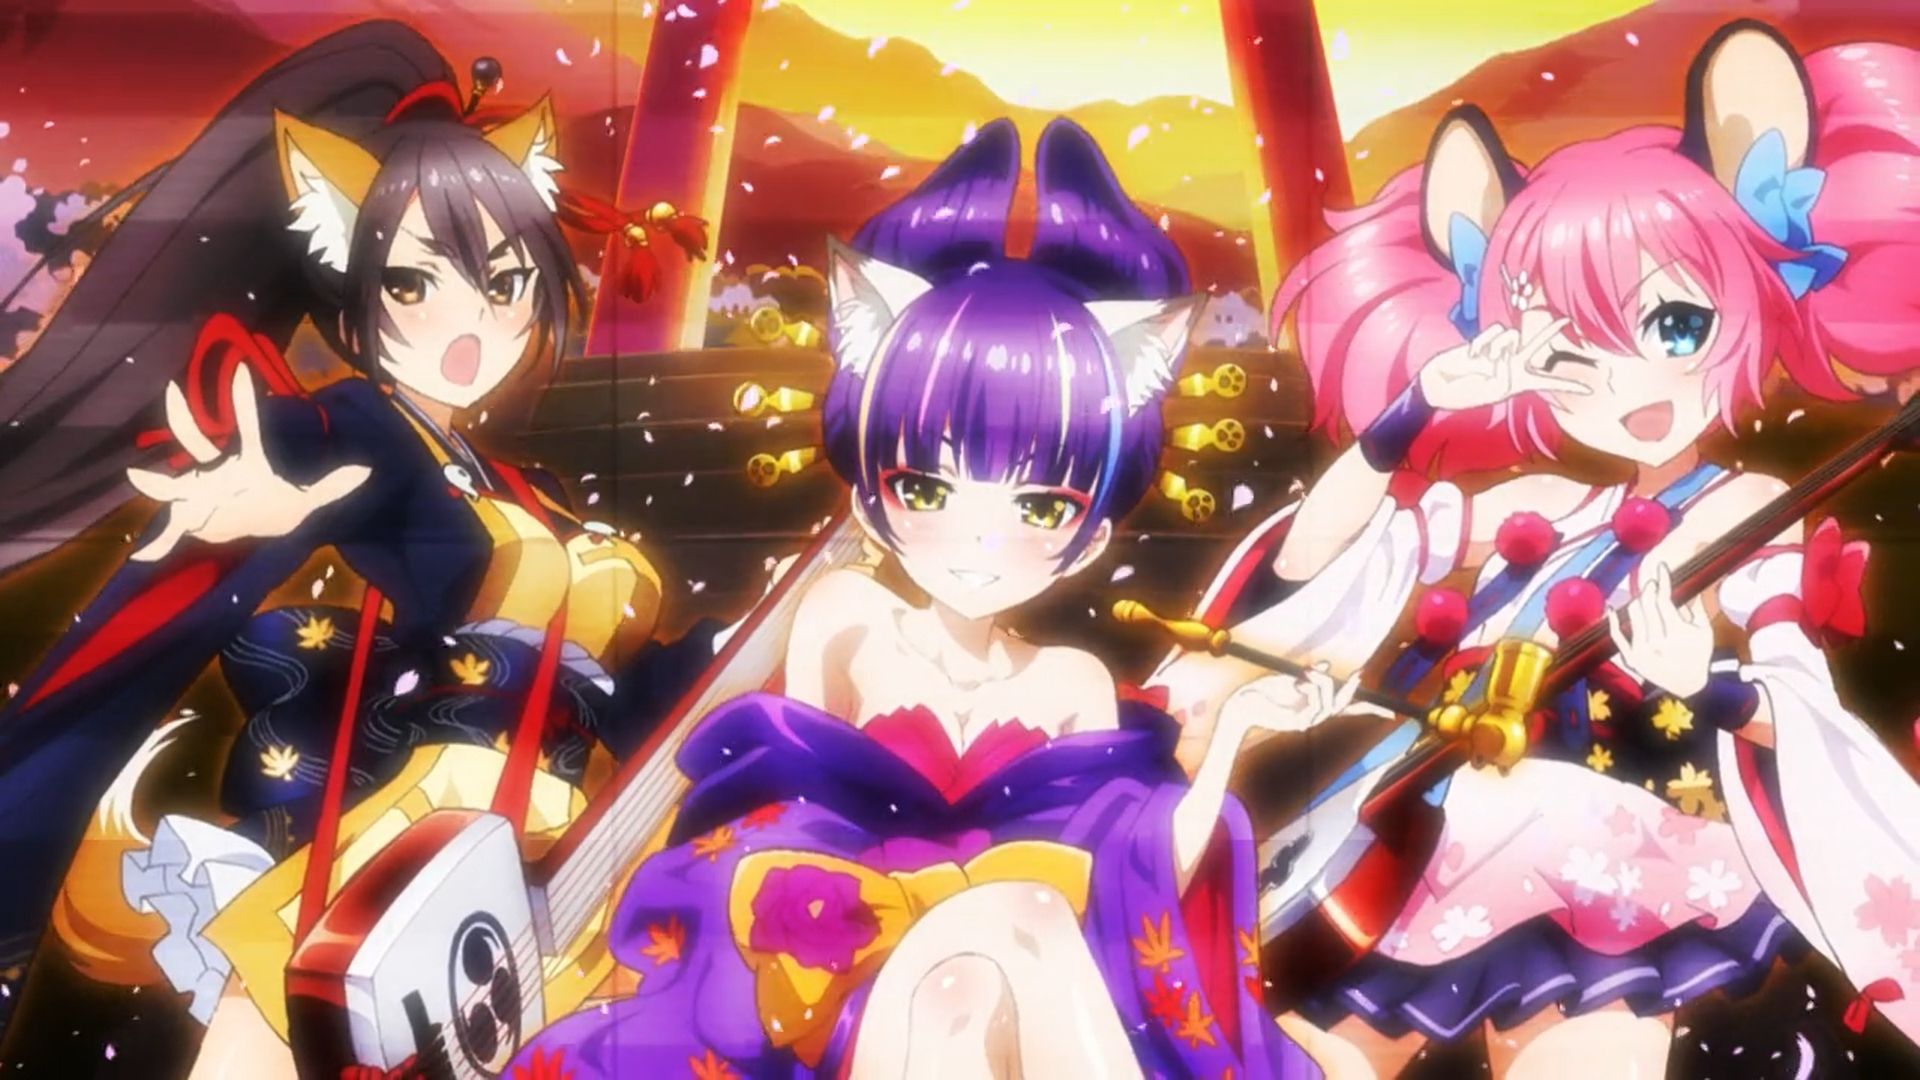 Show By Rock!! is one of the best anime series with girl idols. 